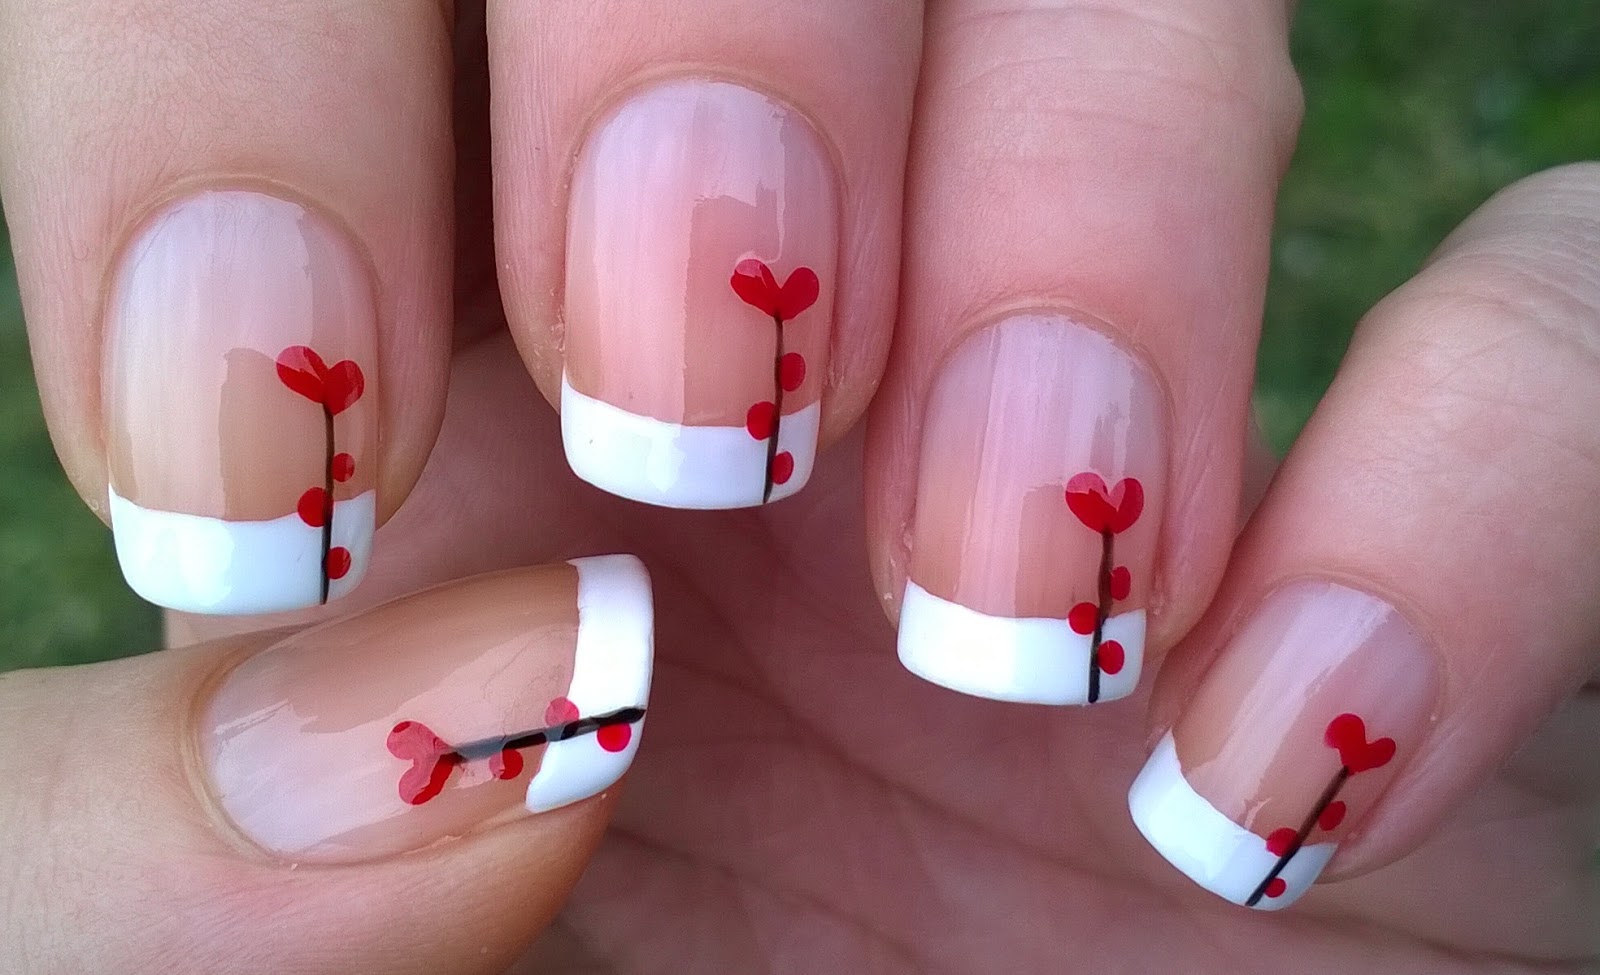 Life World Women 'Heart Flower' French Manicure For Valentine's Day